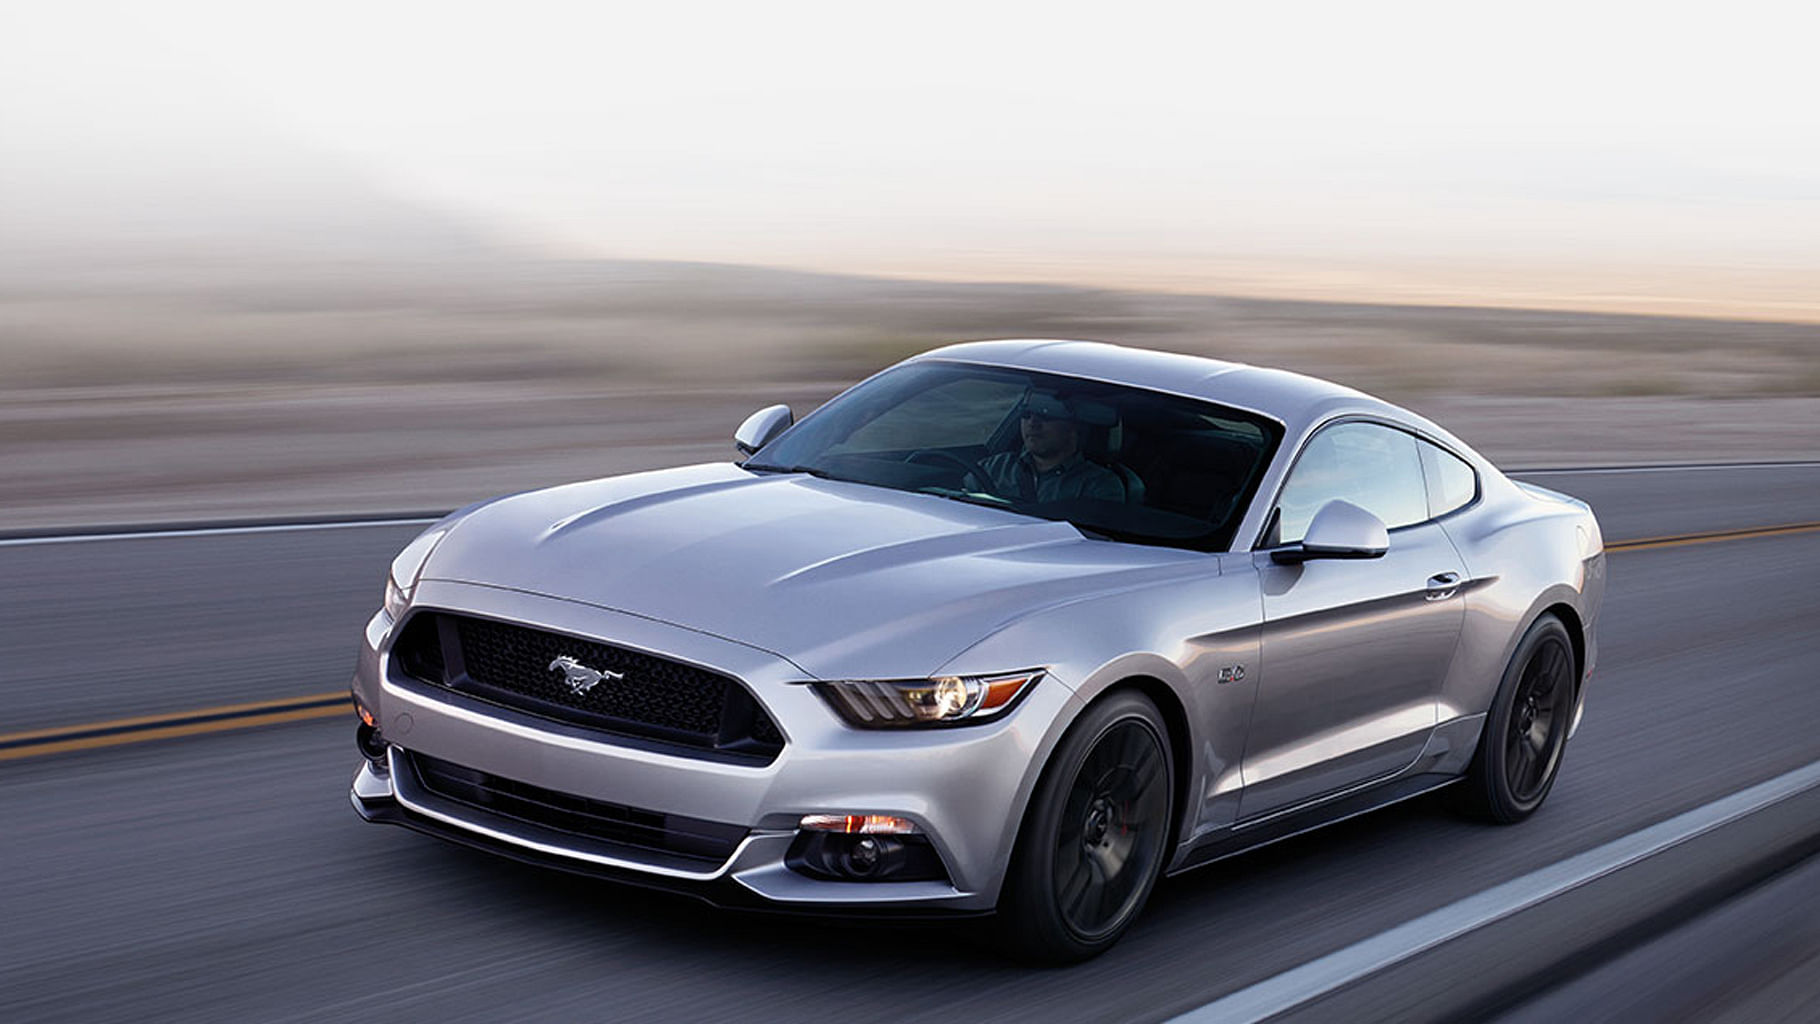 Ford Mustang. (Photo Courtesy: <a href="http://www.india.ford.com/cars/mustang">Ford India</a>)